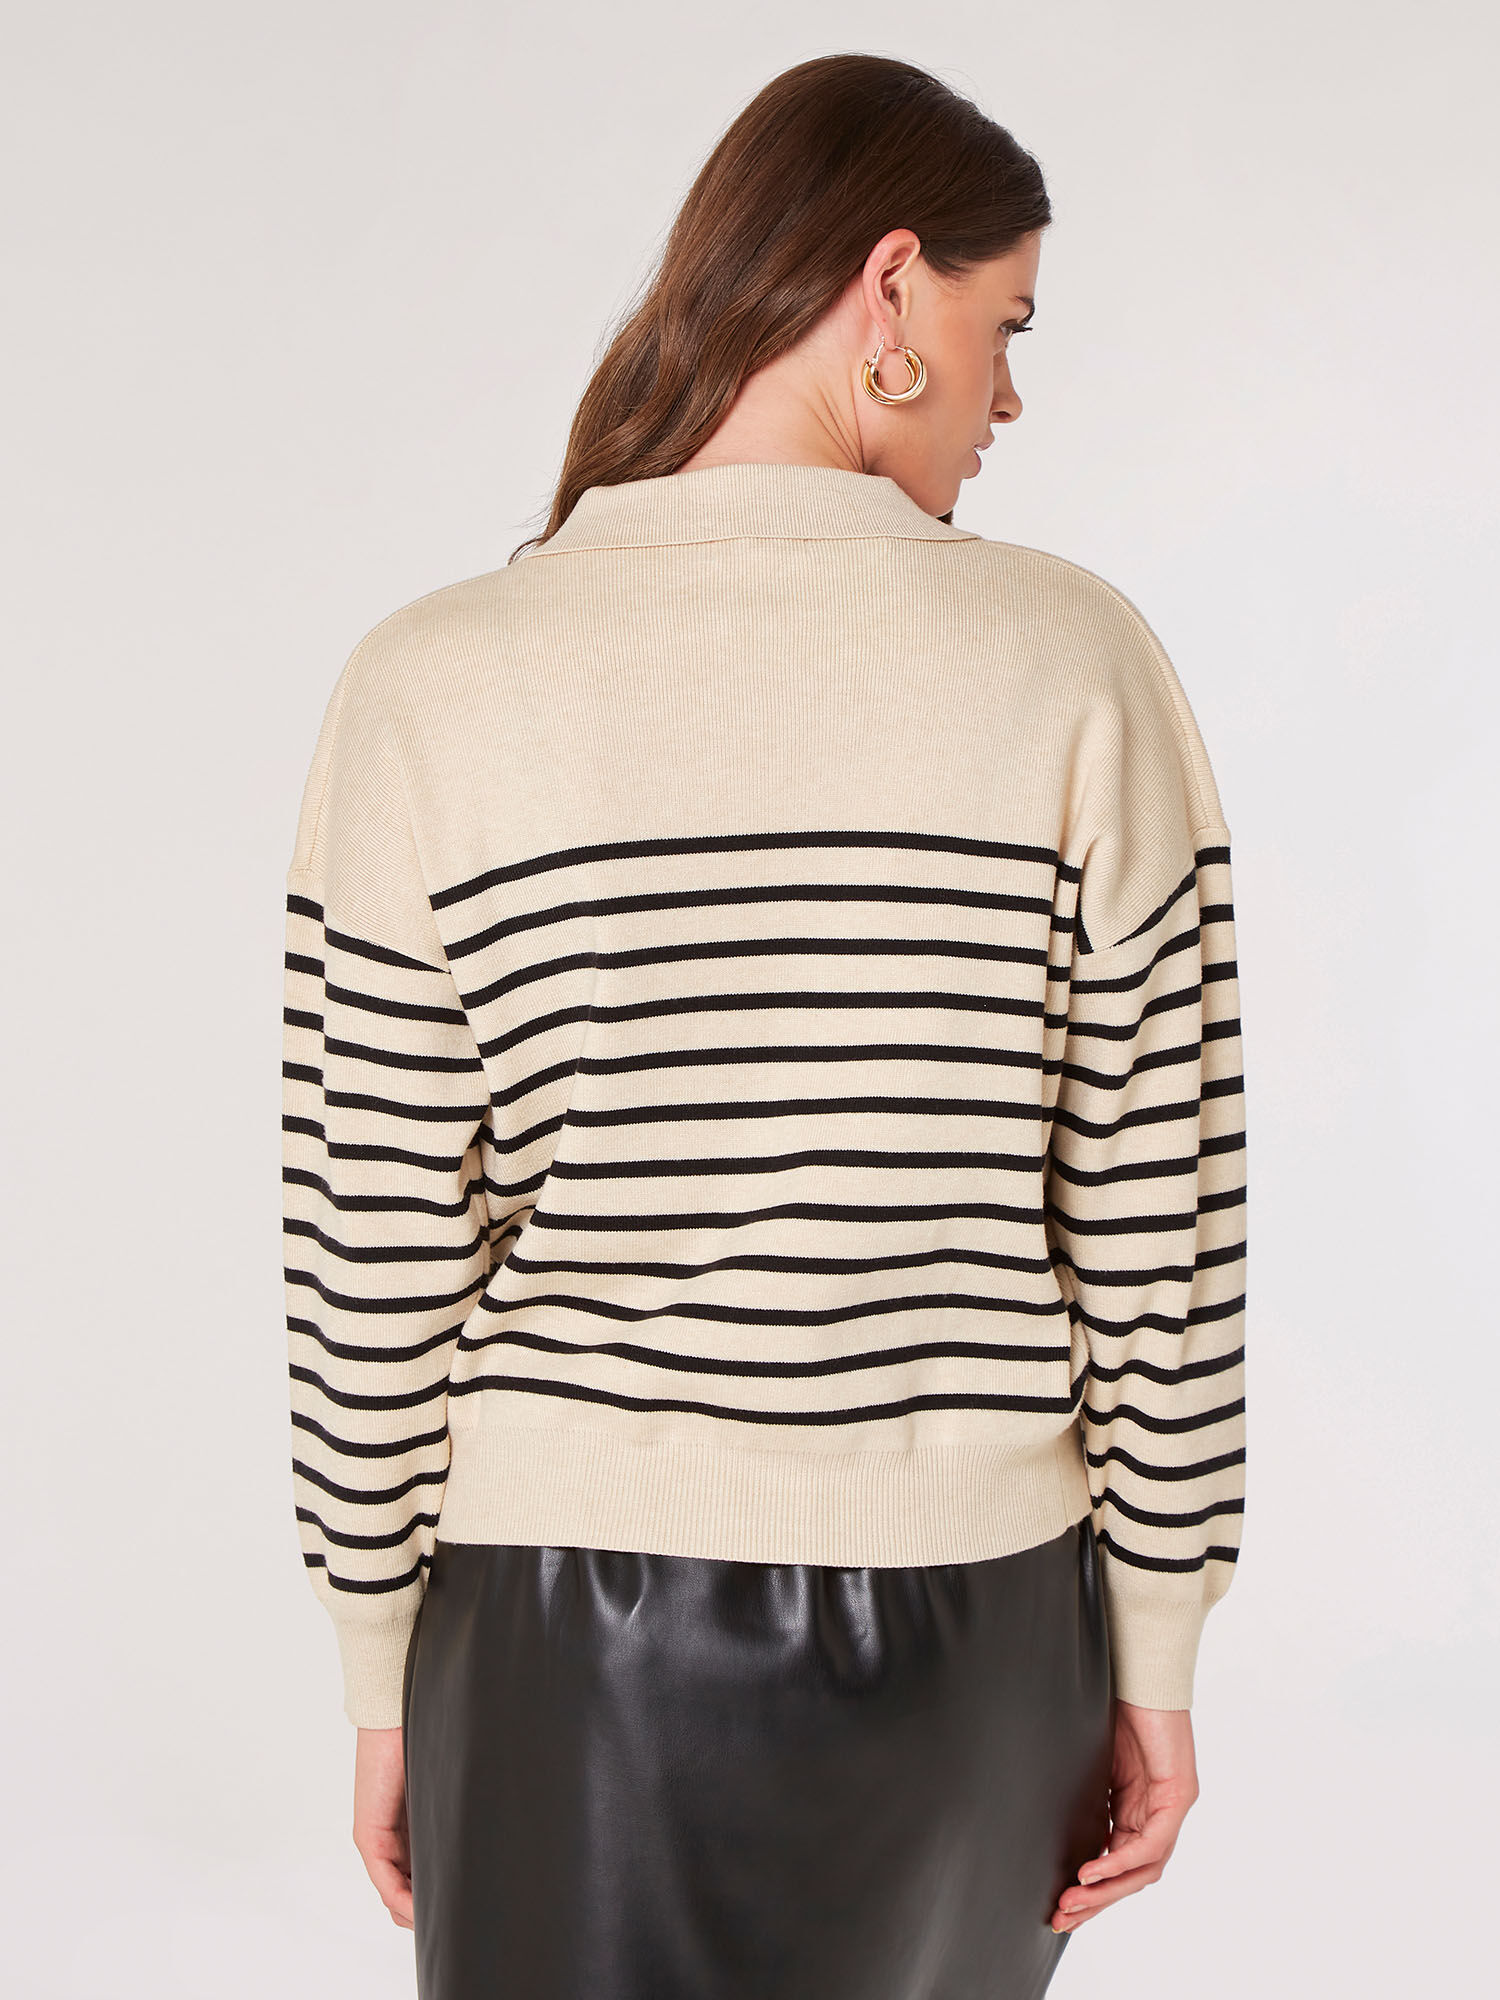 Open Collar Stripe Knit Jumper | Apricot Clothing